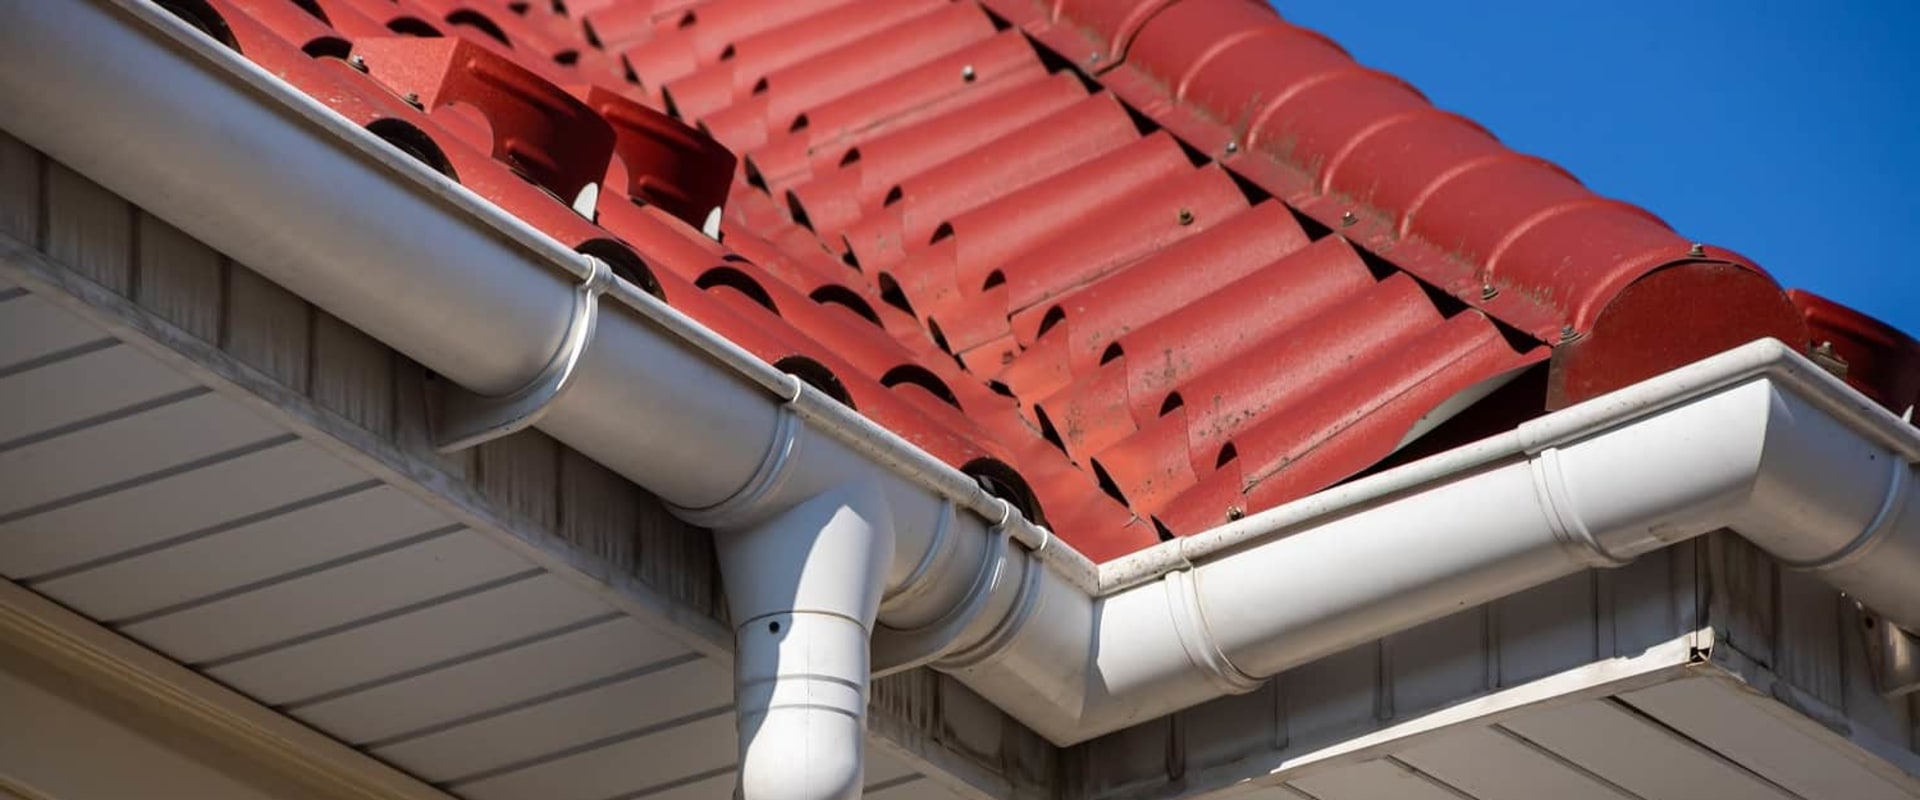 How to Install and Repair Gutters: A Complete Guide for Homeowners and Businesses